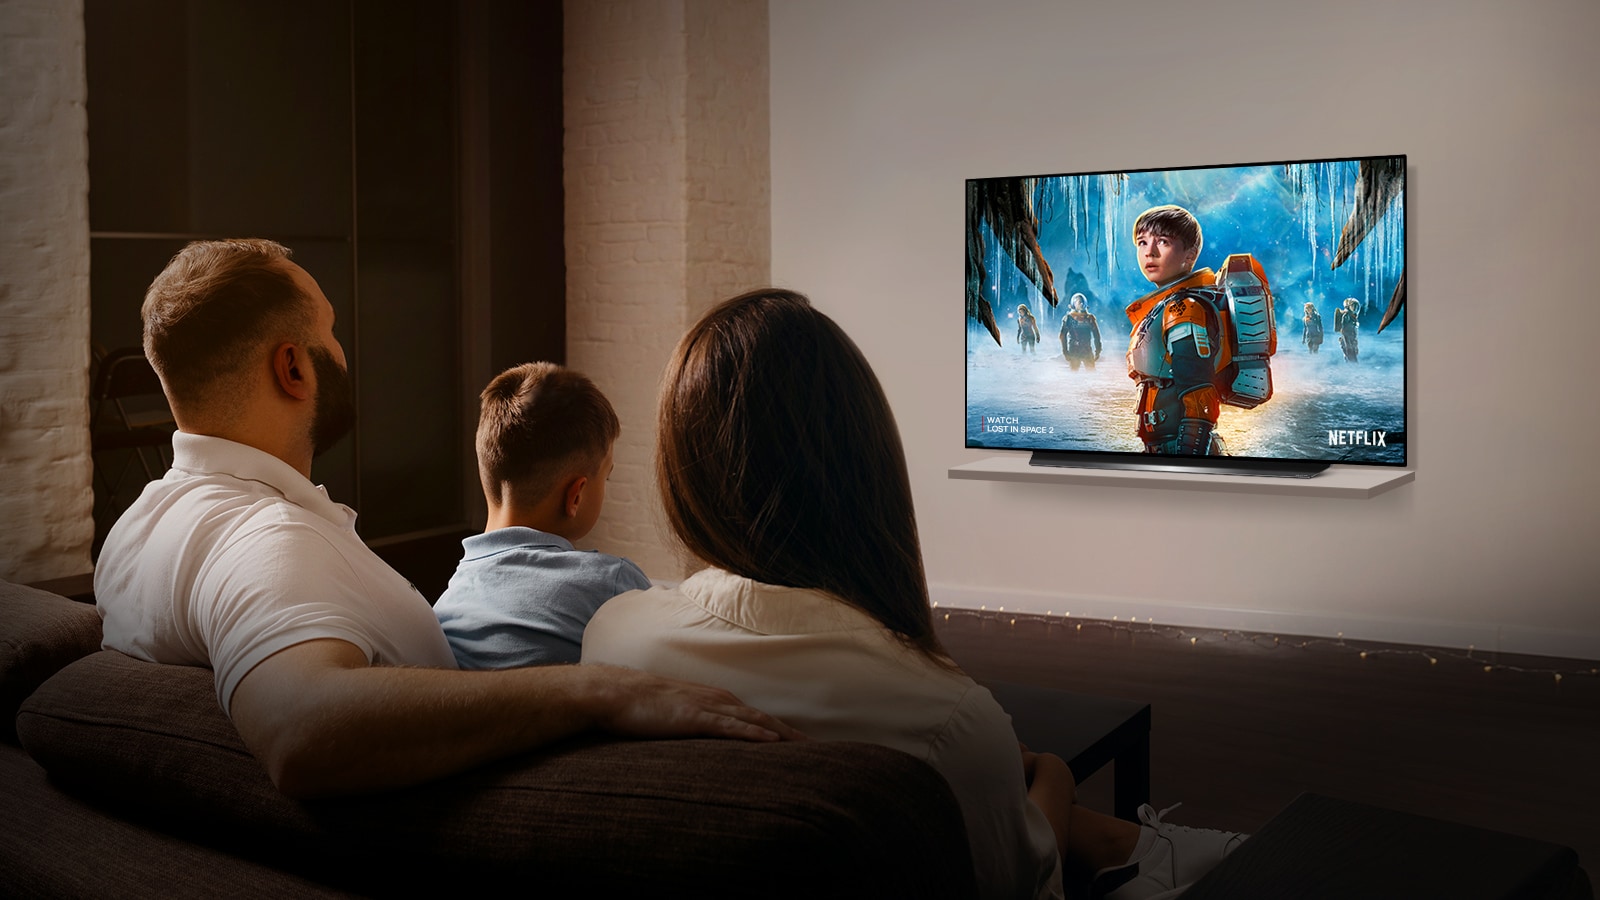 OLED makes home the best movie theatre1